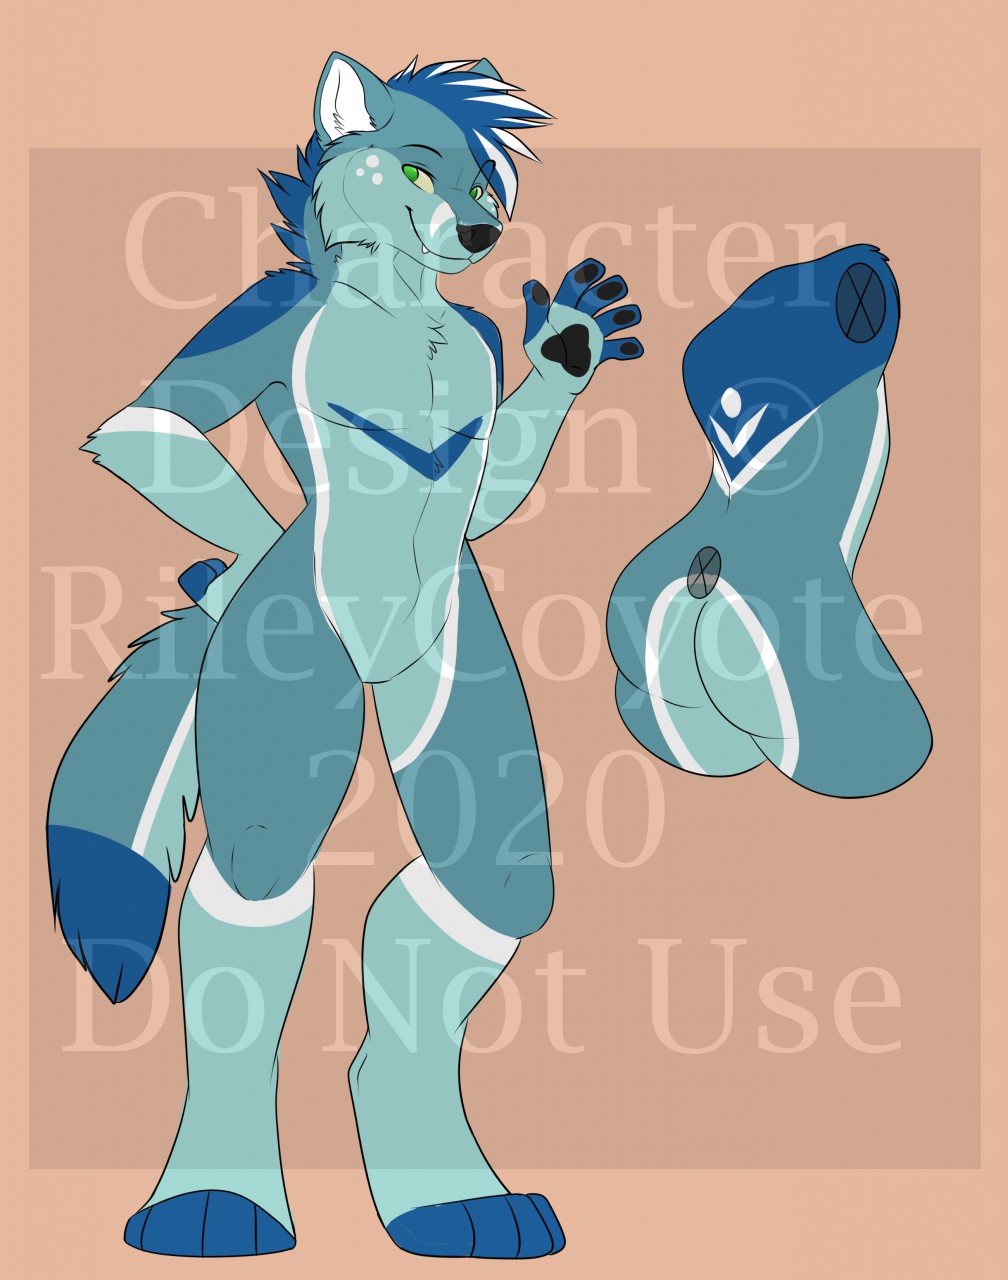 Most recent image: Blue Coyfox Adoptable - FOR SALE